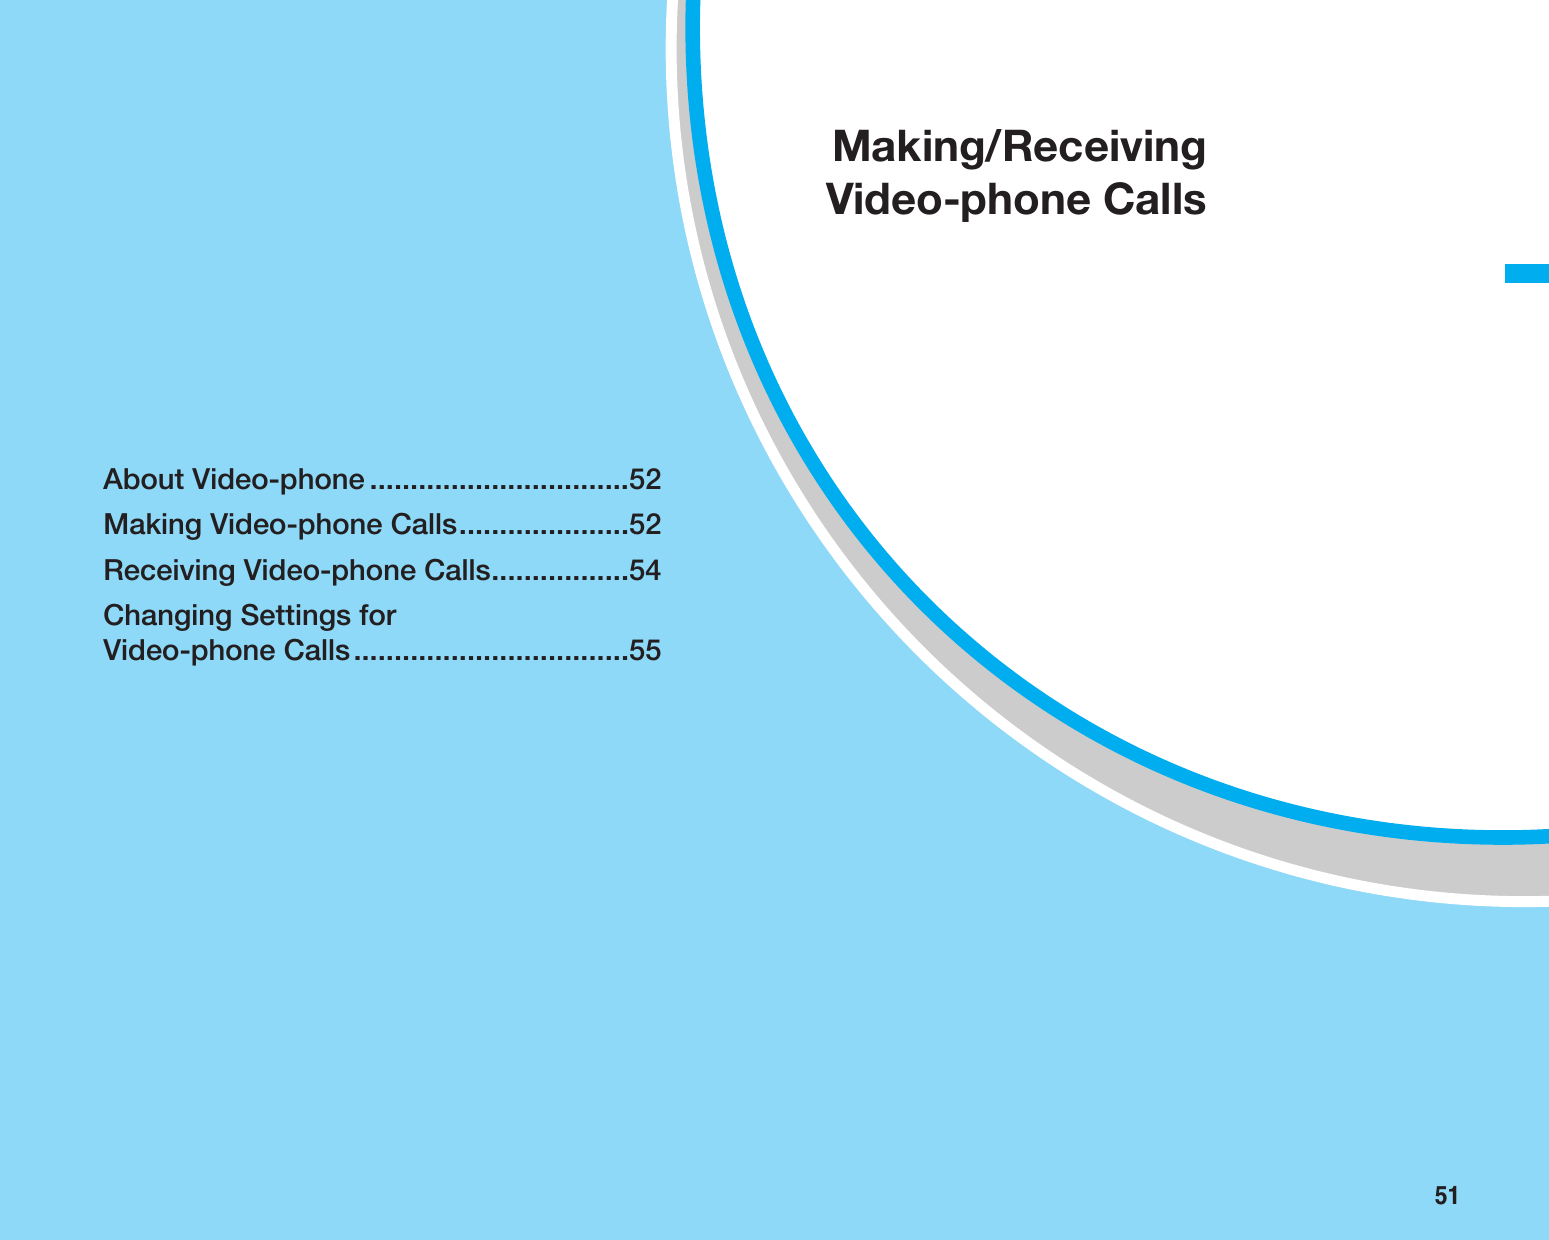 51About Video-phone ................................52Making Video-phone Calls.....................52Receiving Video-phone Calls.................54Changing Settings for Video-phone Calls..................................55Making/ReceivingVideo-phone Calls